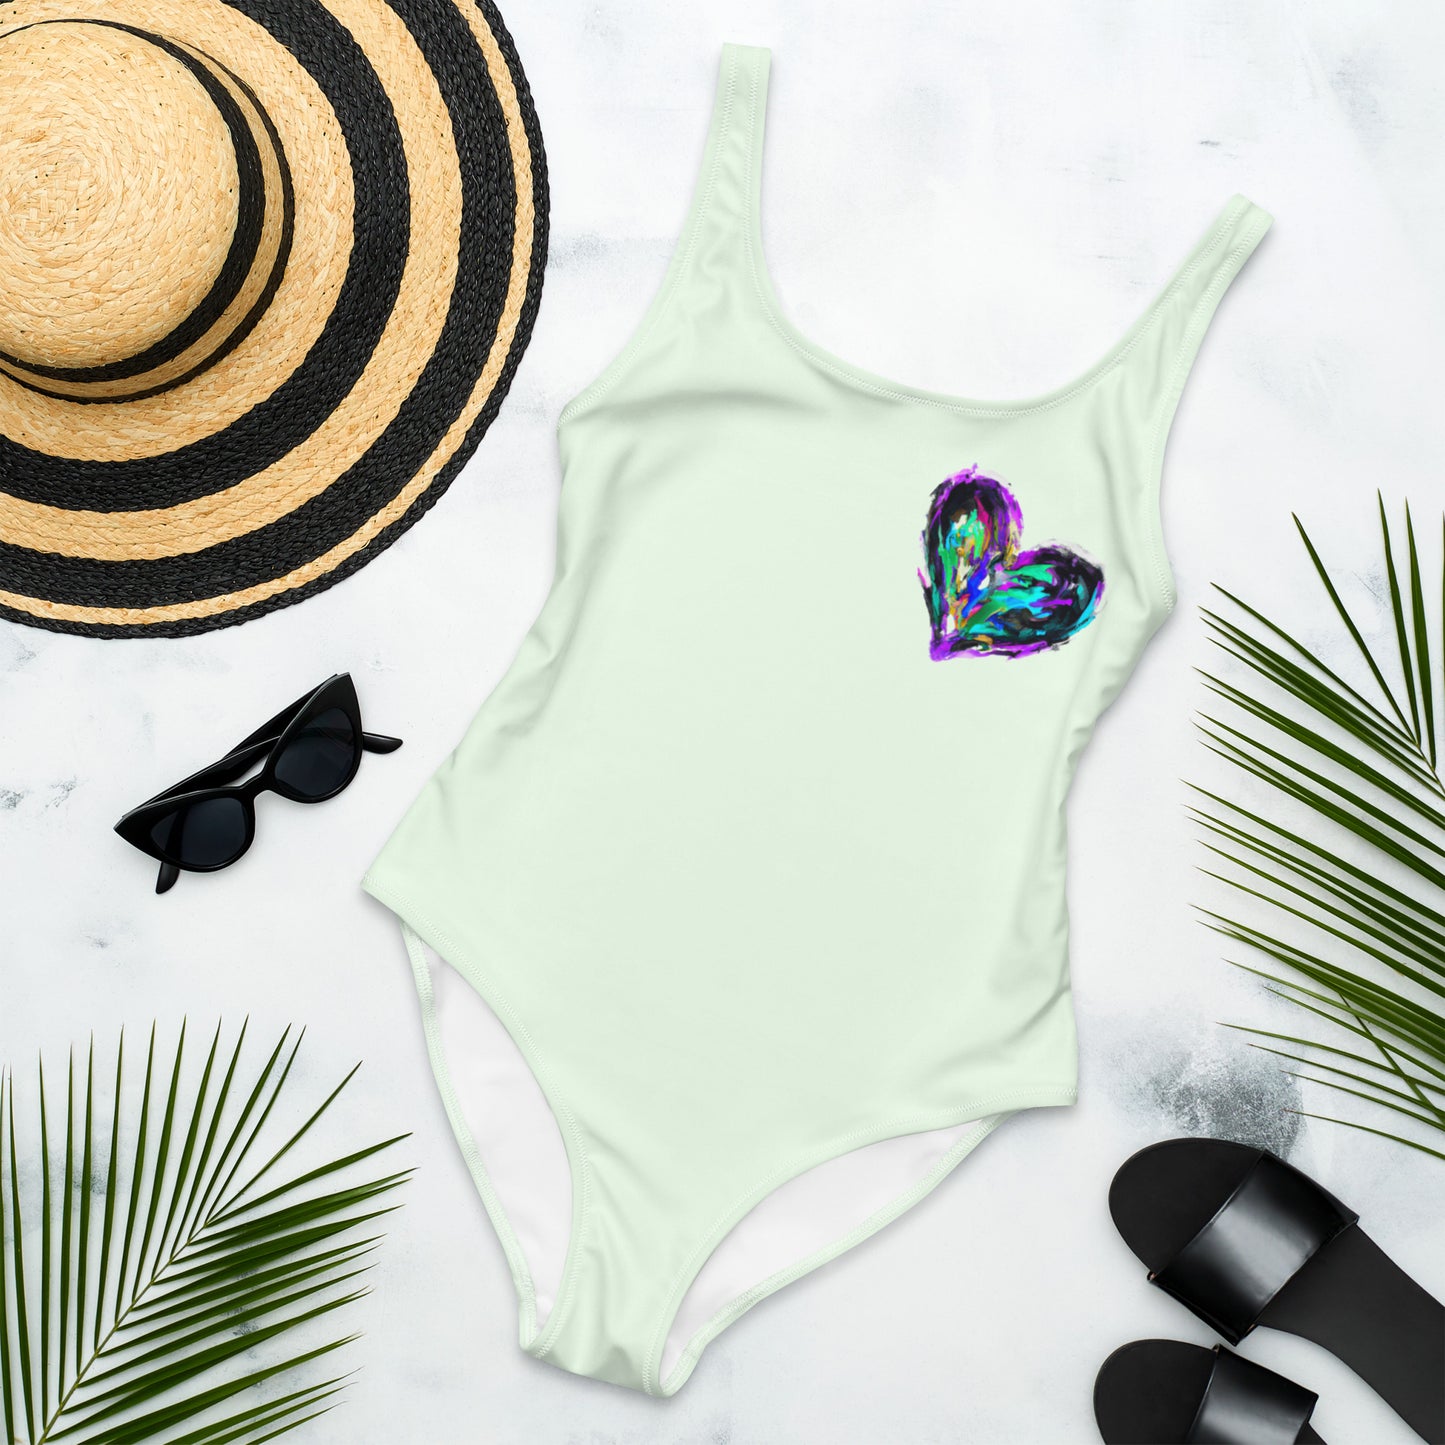 One piece swimsuit with a painted heart motive on a light green background - front